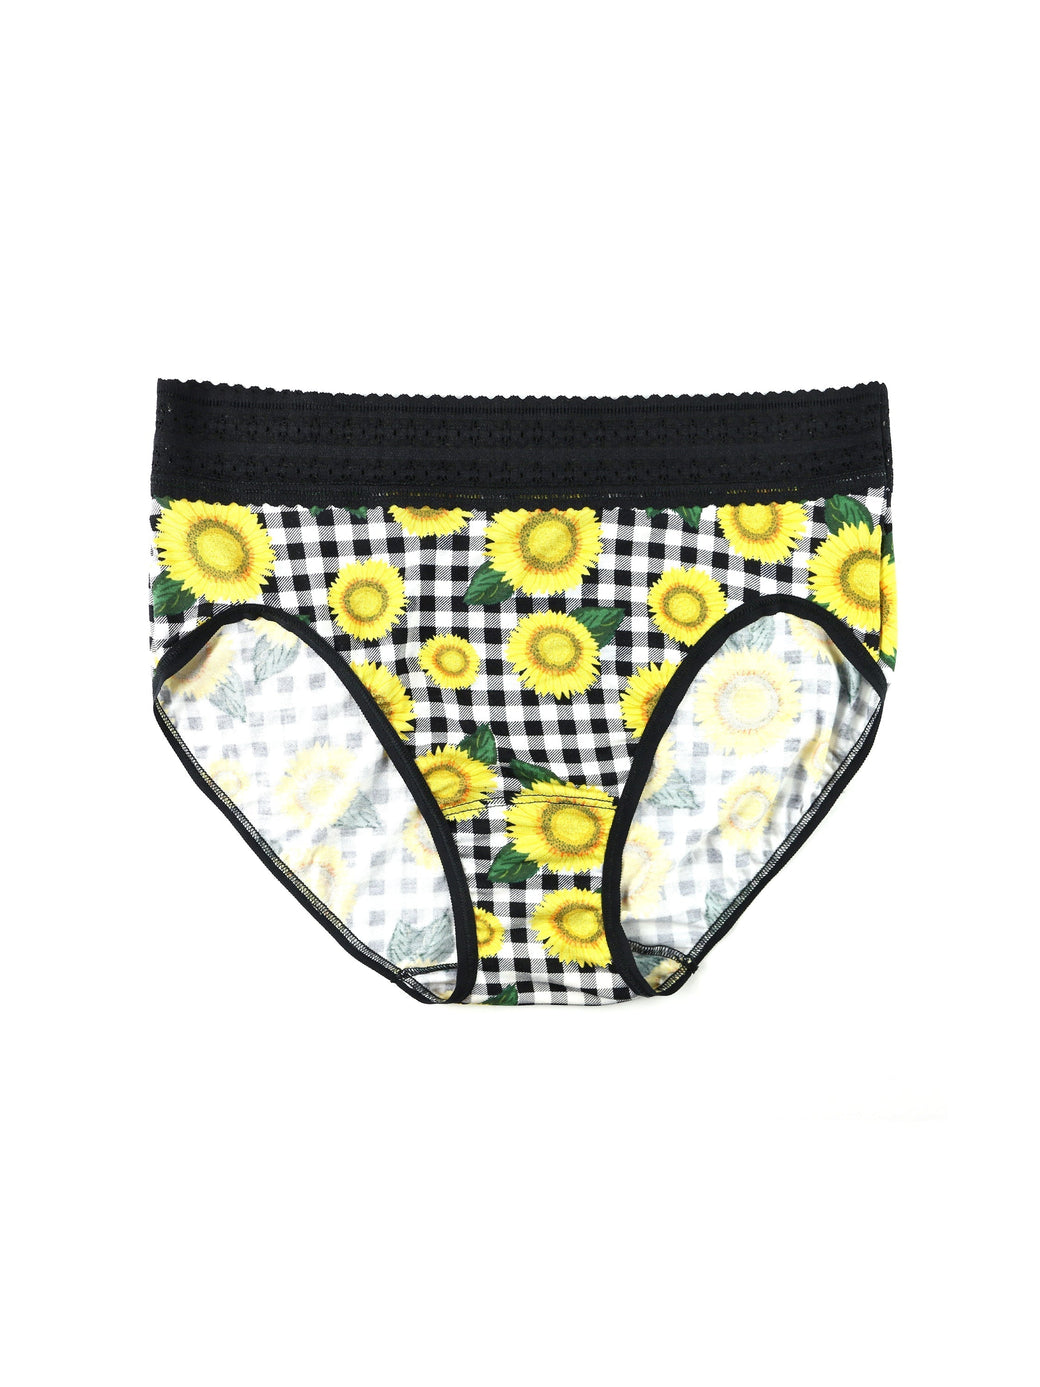 DreamEase™  Printed French Brief Fields of Gold Sale